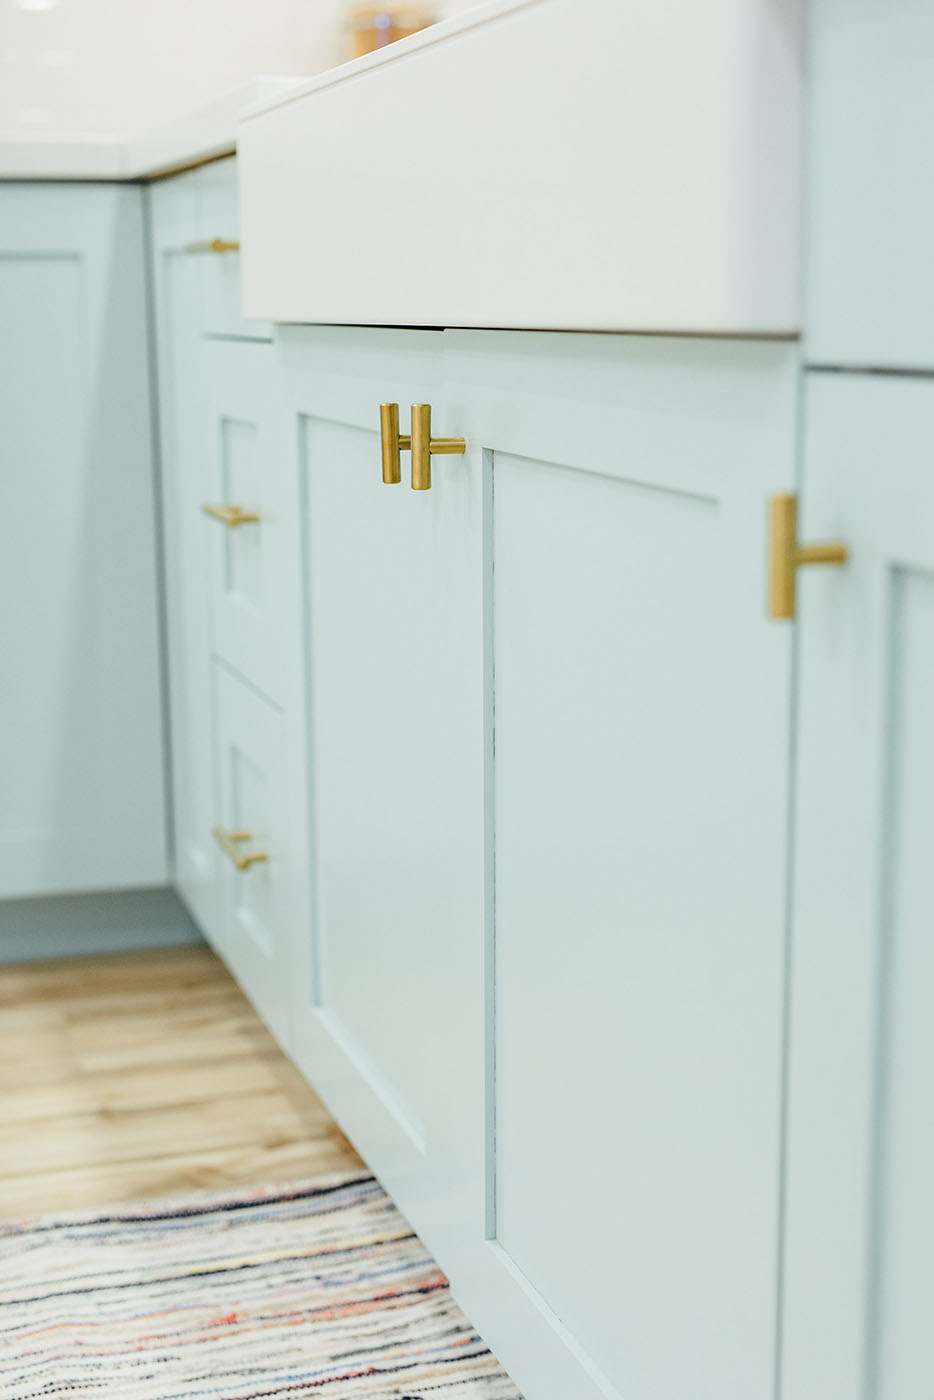 https://cdn.shopify.com/s/files/1/0006/6558/3668/files/robyn_kitchen_cabinet_colors_Headspace-Detail-1.jpg?v=1622815755